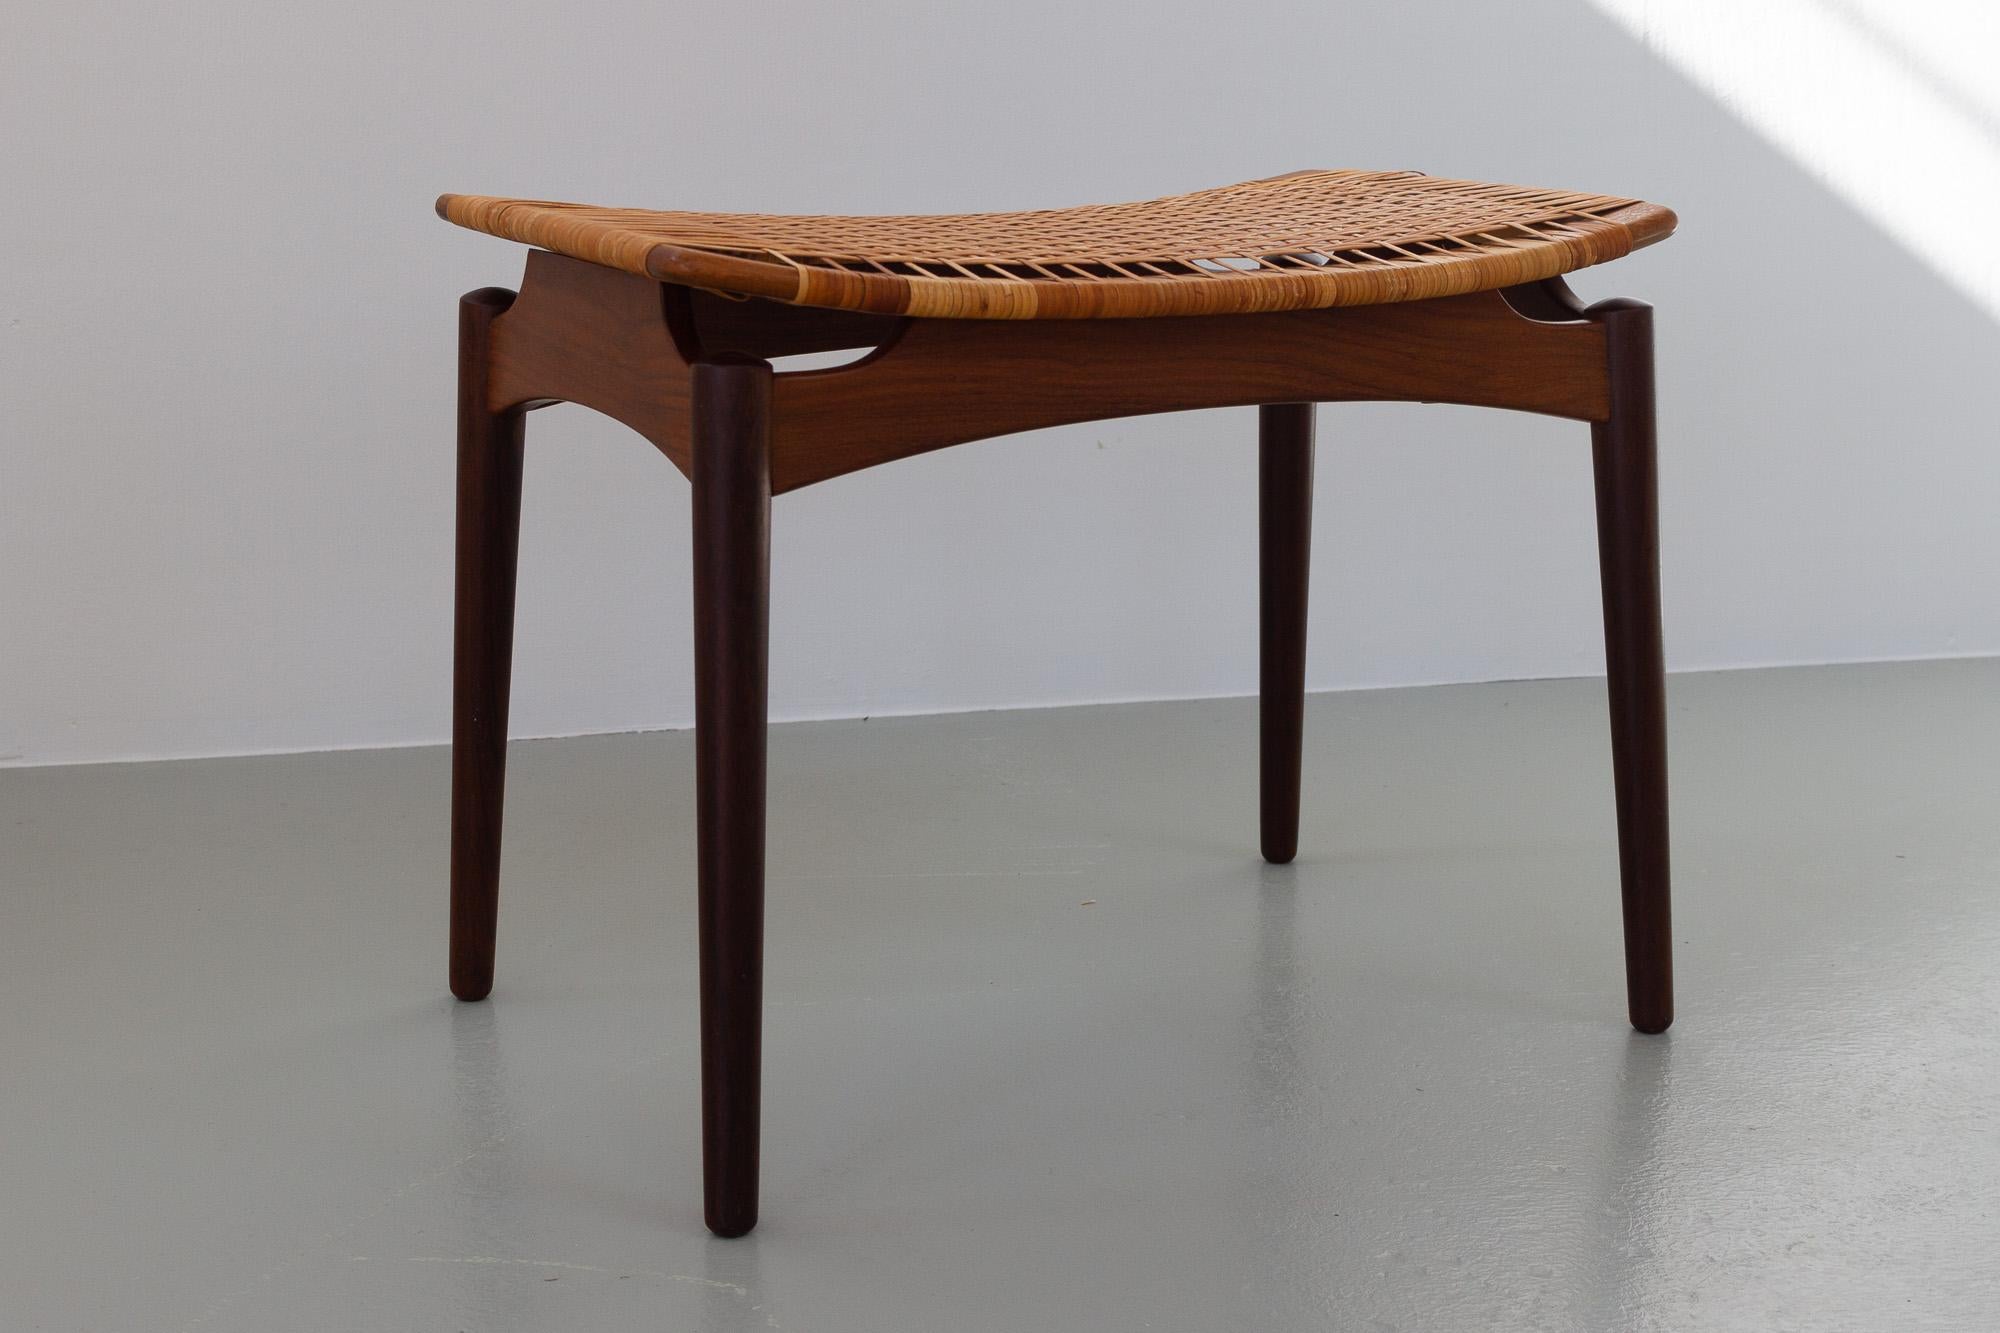 Danish teak and cane stool from Ølholm Møbelfabrik, 1950s
Designed by Sigfred Omann for Ølholm Møbelfabrik, Denmark in the 1950s.
Stylish and elegant Mid-Century Modern footstool in solid teak with cane seat. Round tapered legs and curved seat.